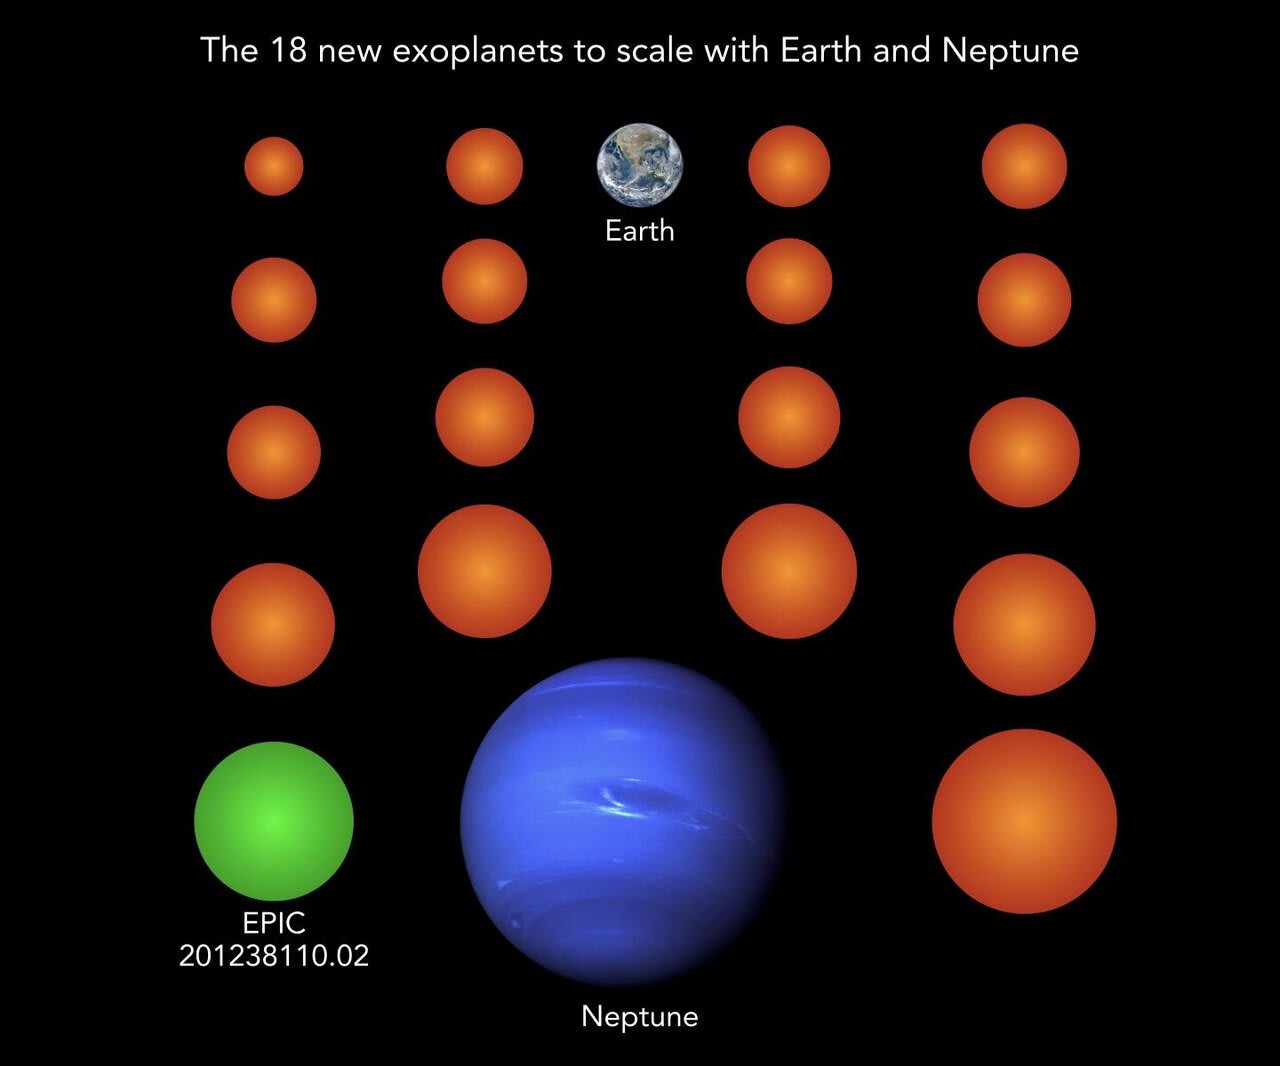 Eighteen Earth-sized exoplanets discovered